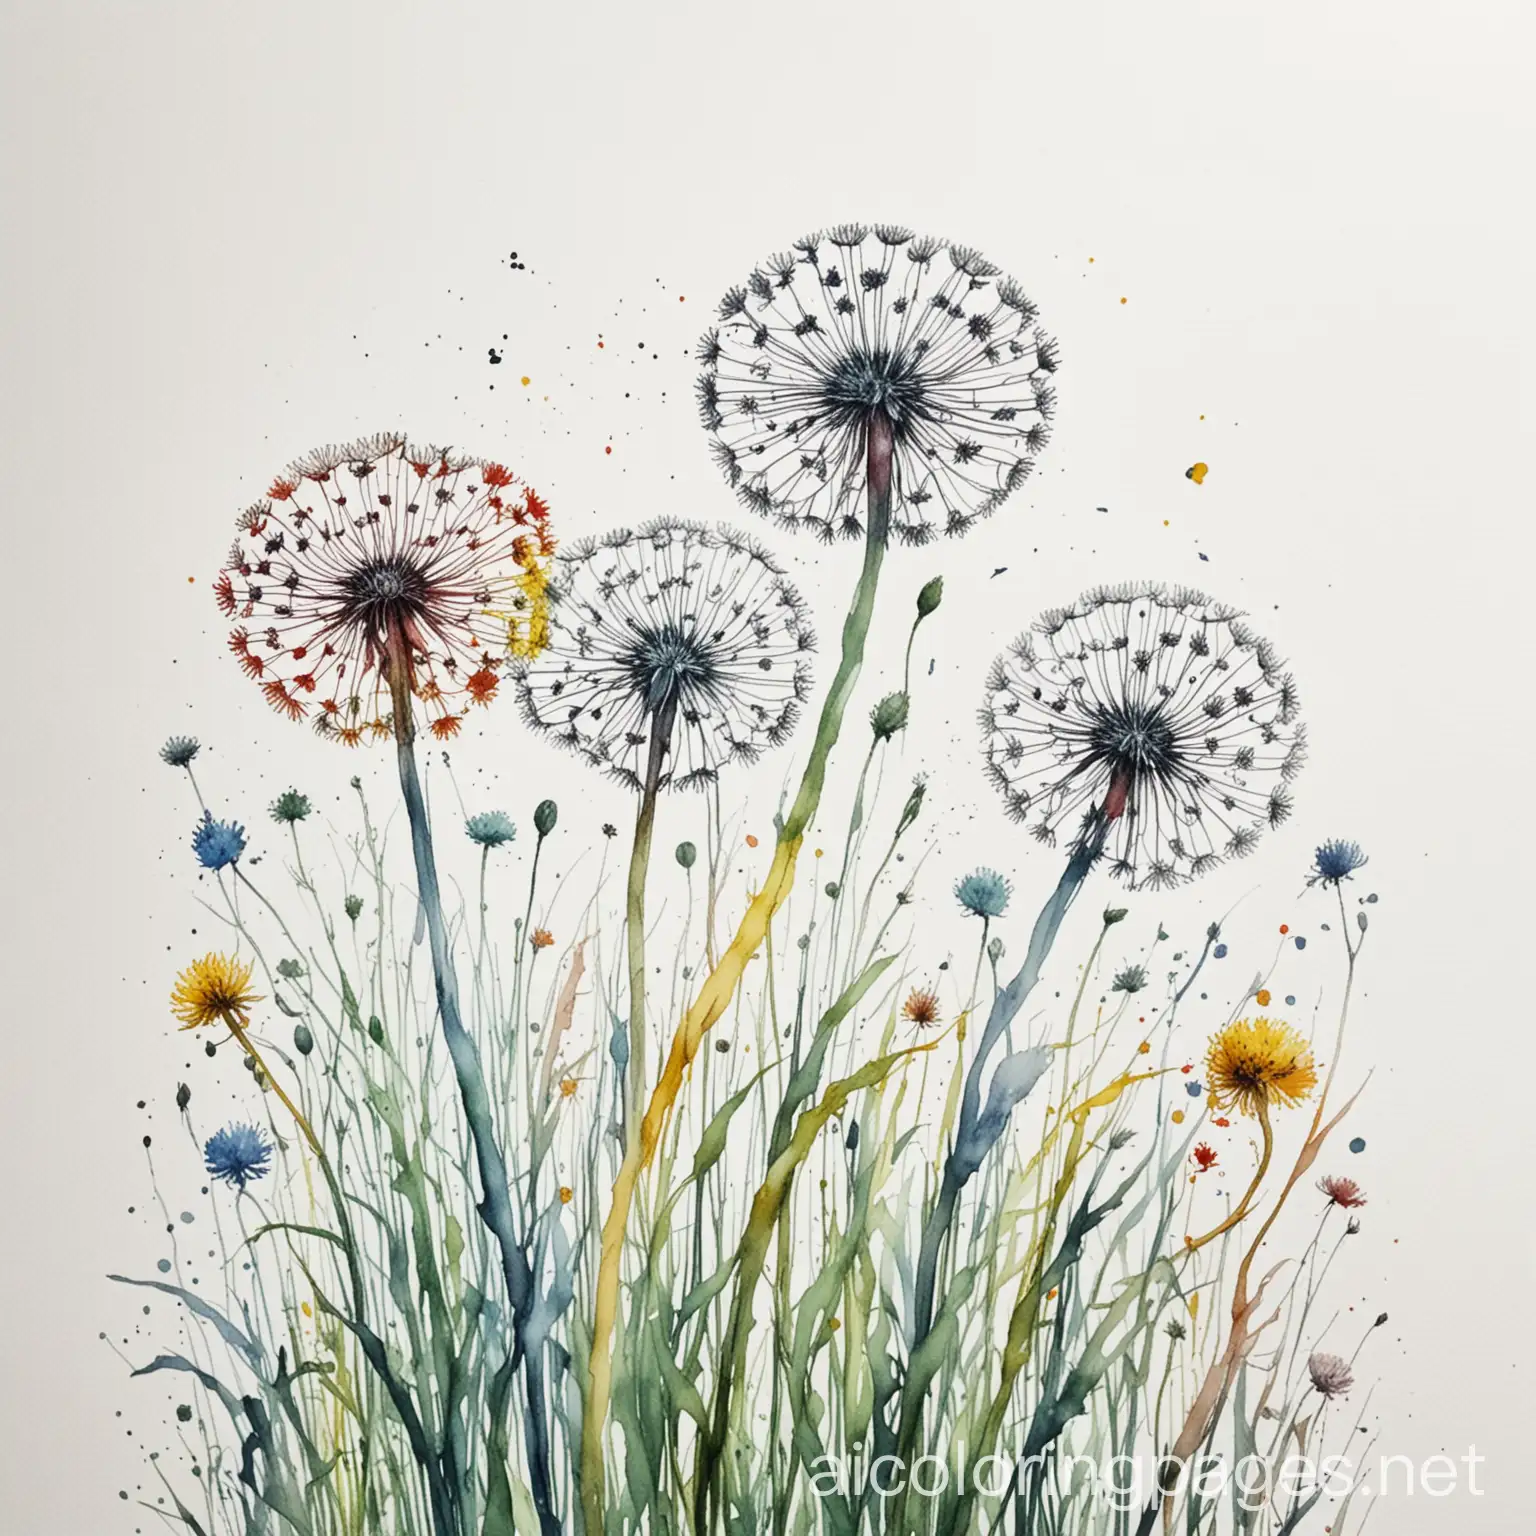 Colorful-Dandelions-in-Field-Watercolor-Painting